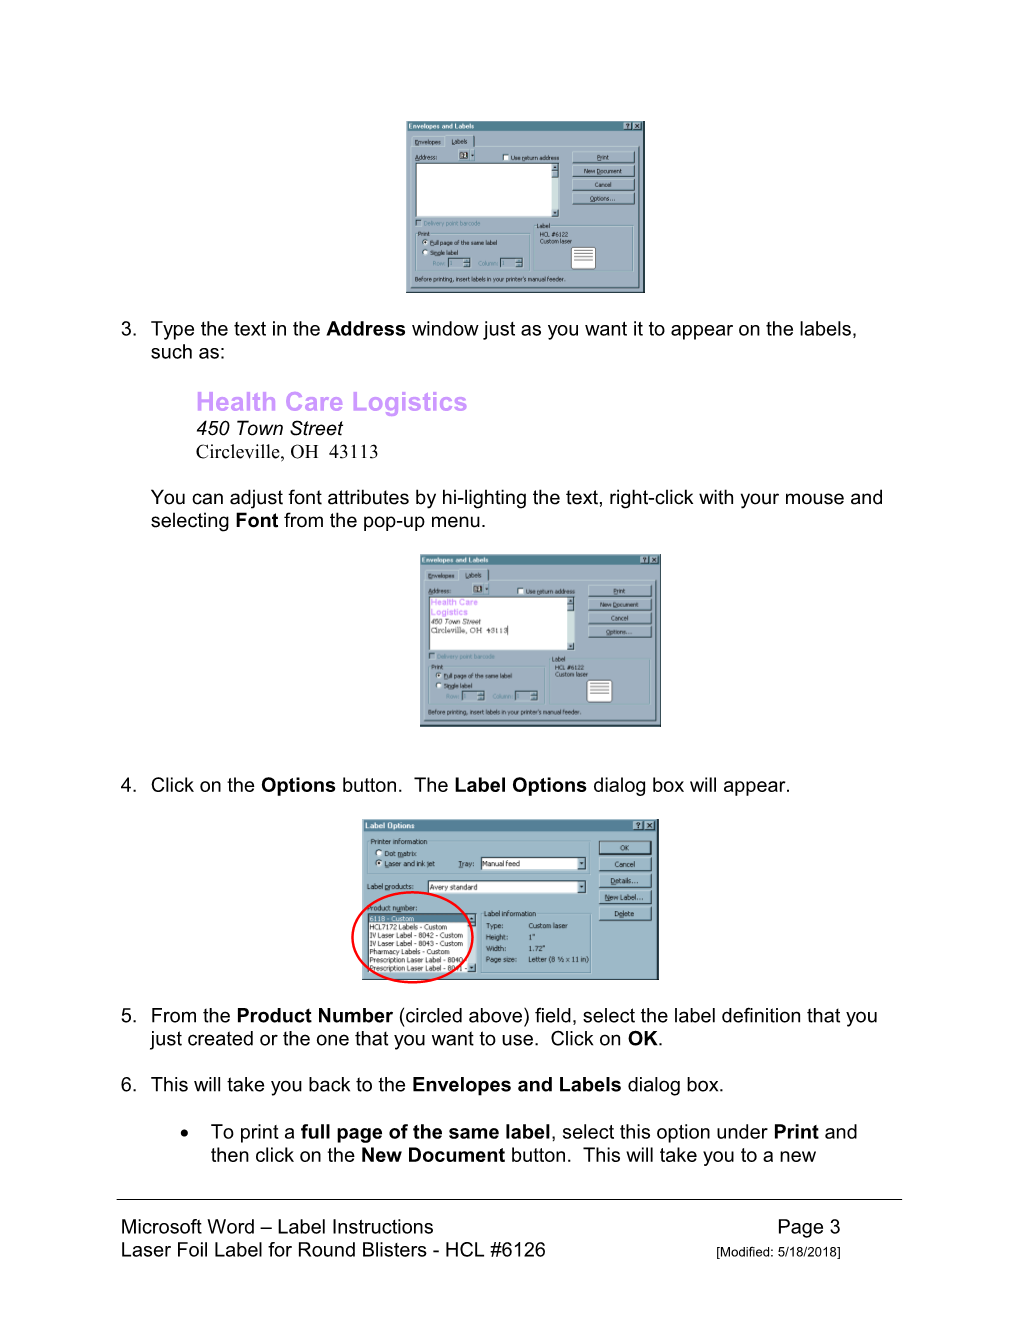 Microsoftword Labels Instructions